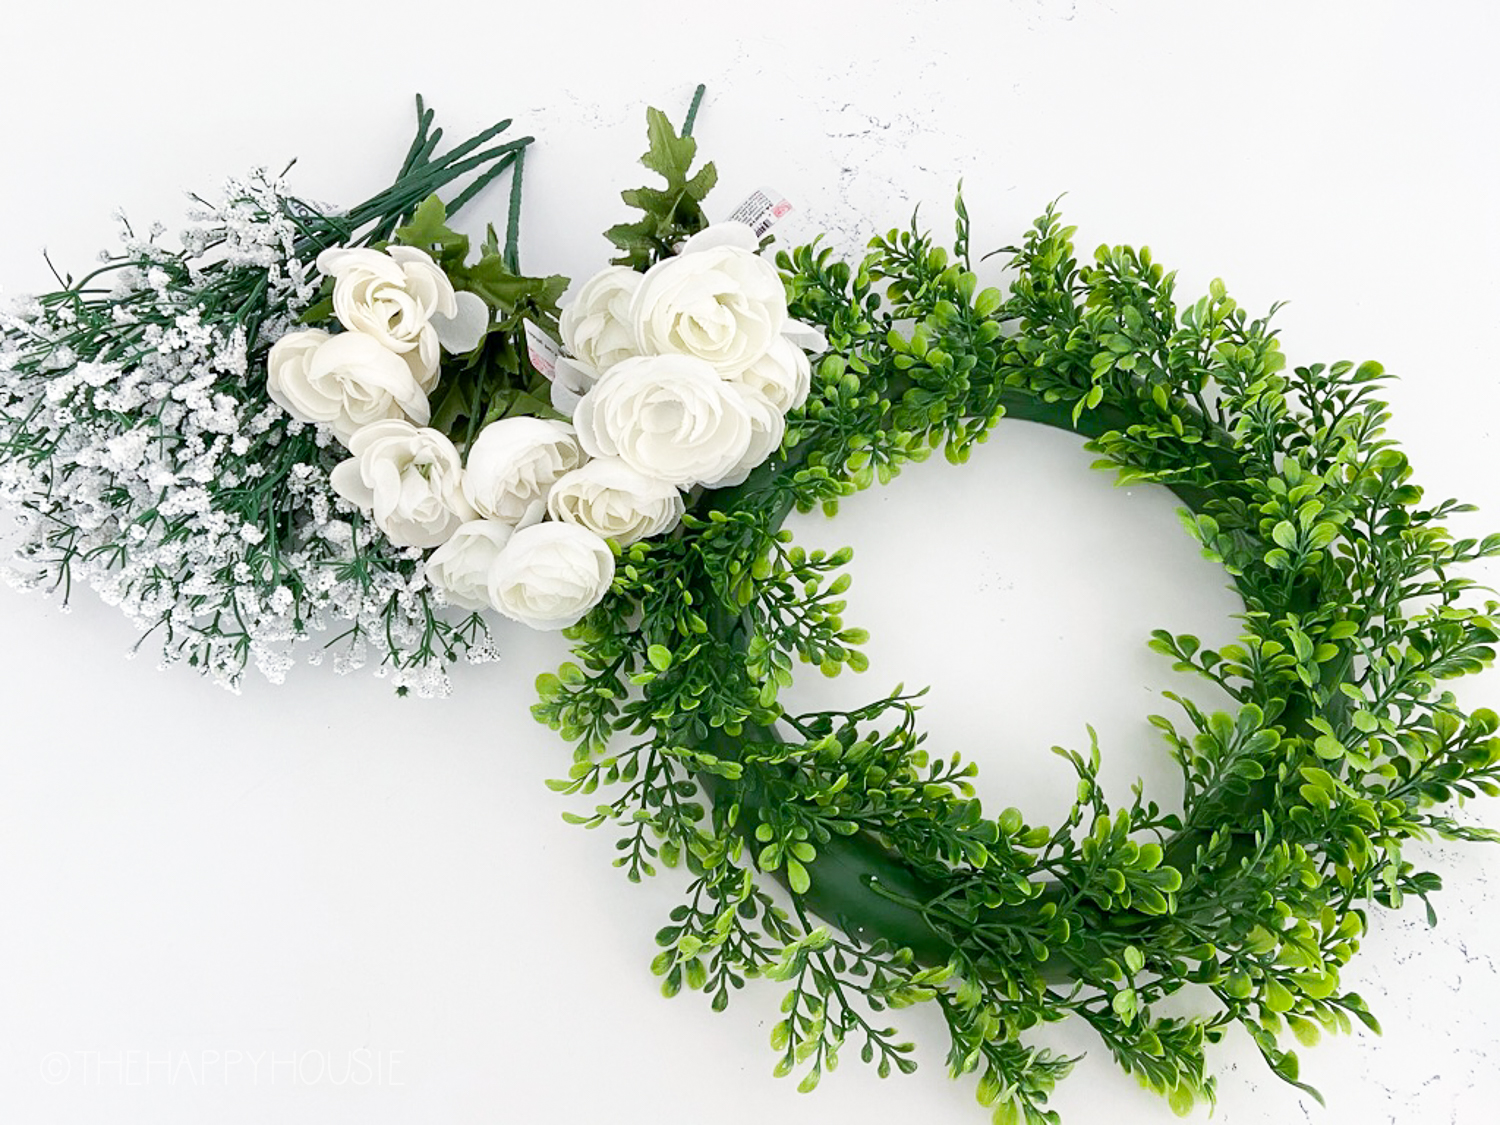 A green wreath and white flowers beside it.